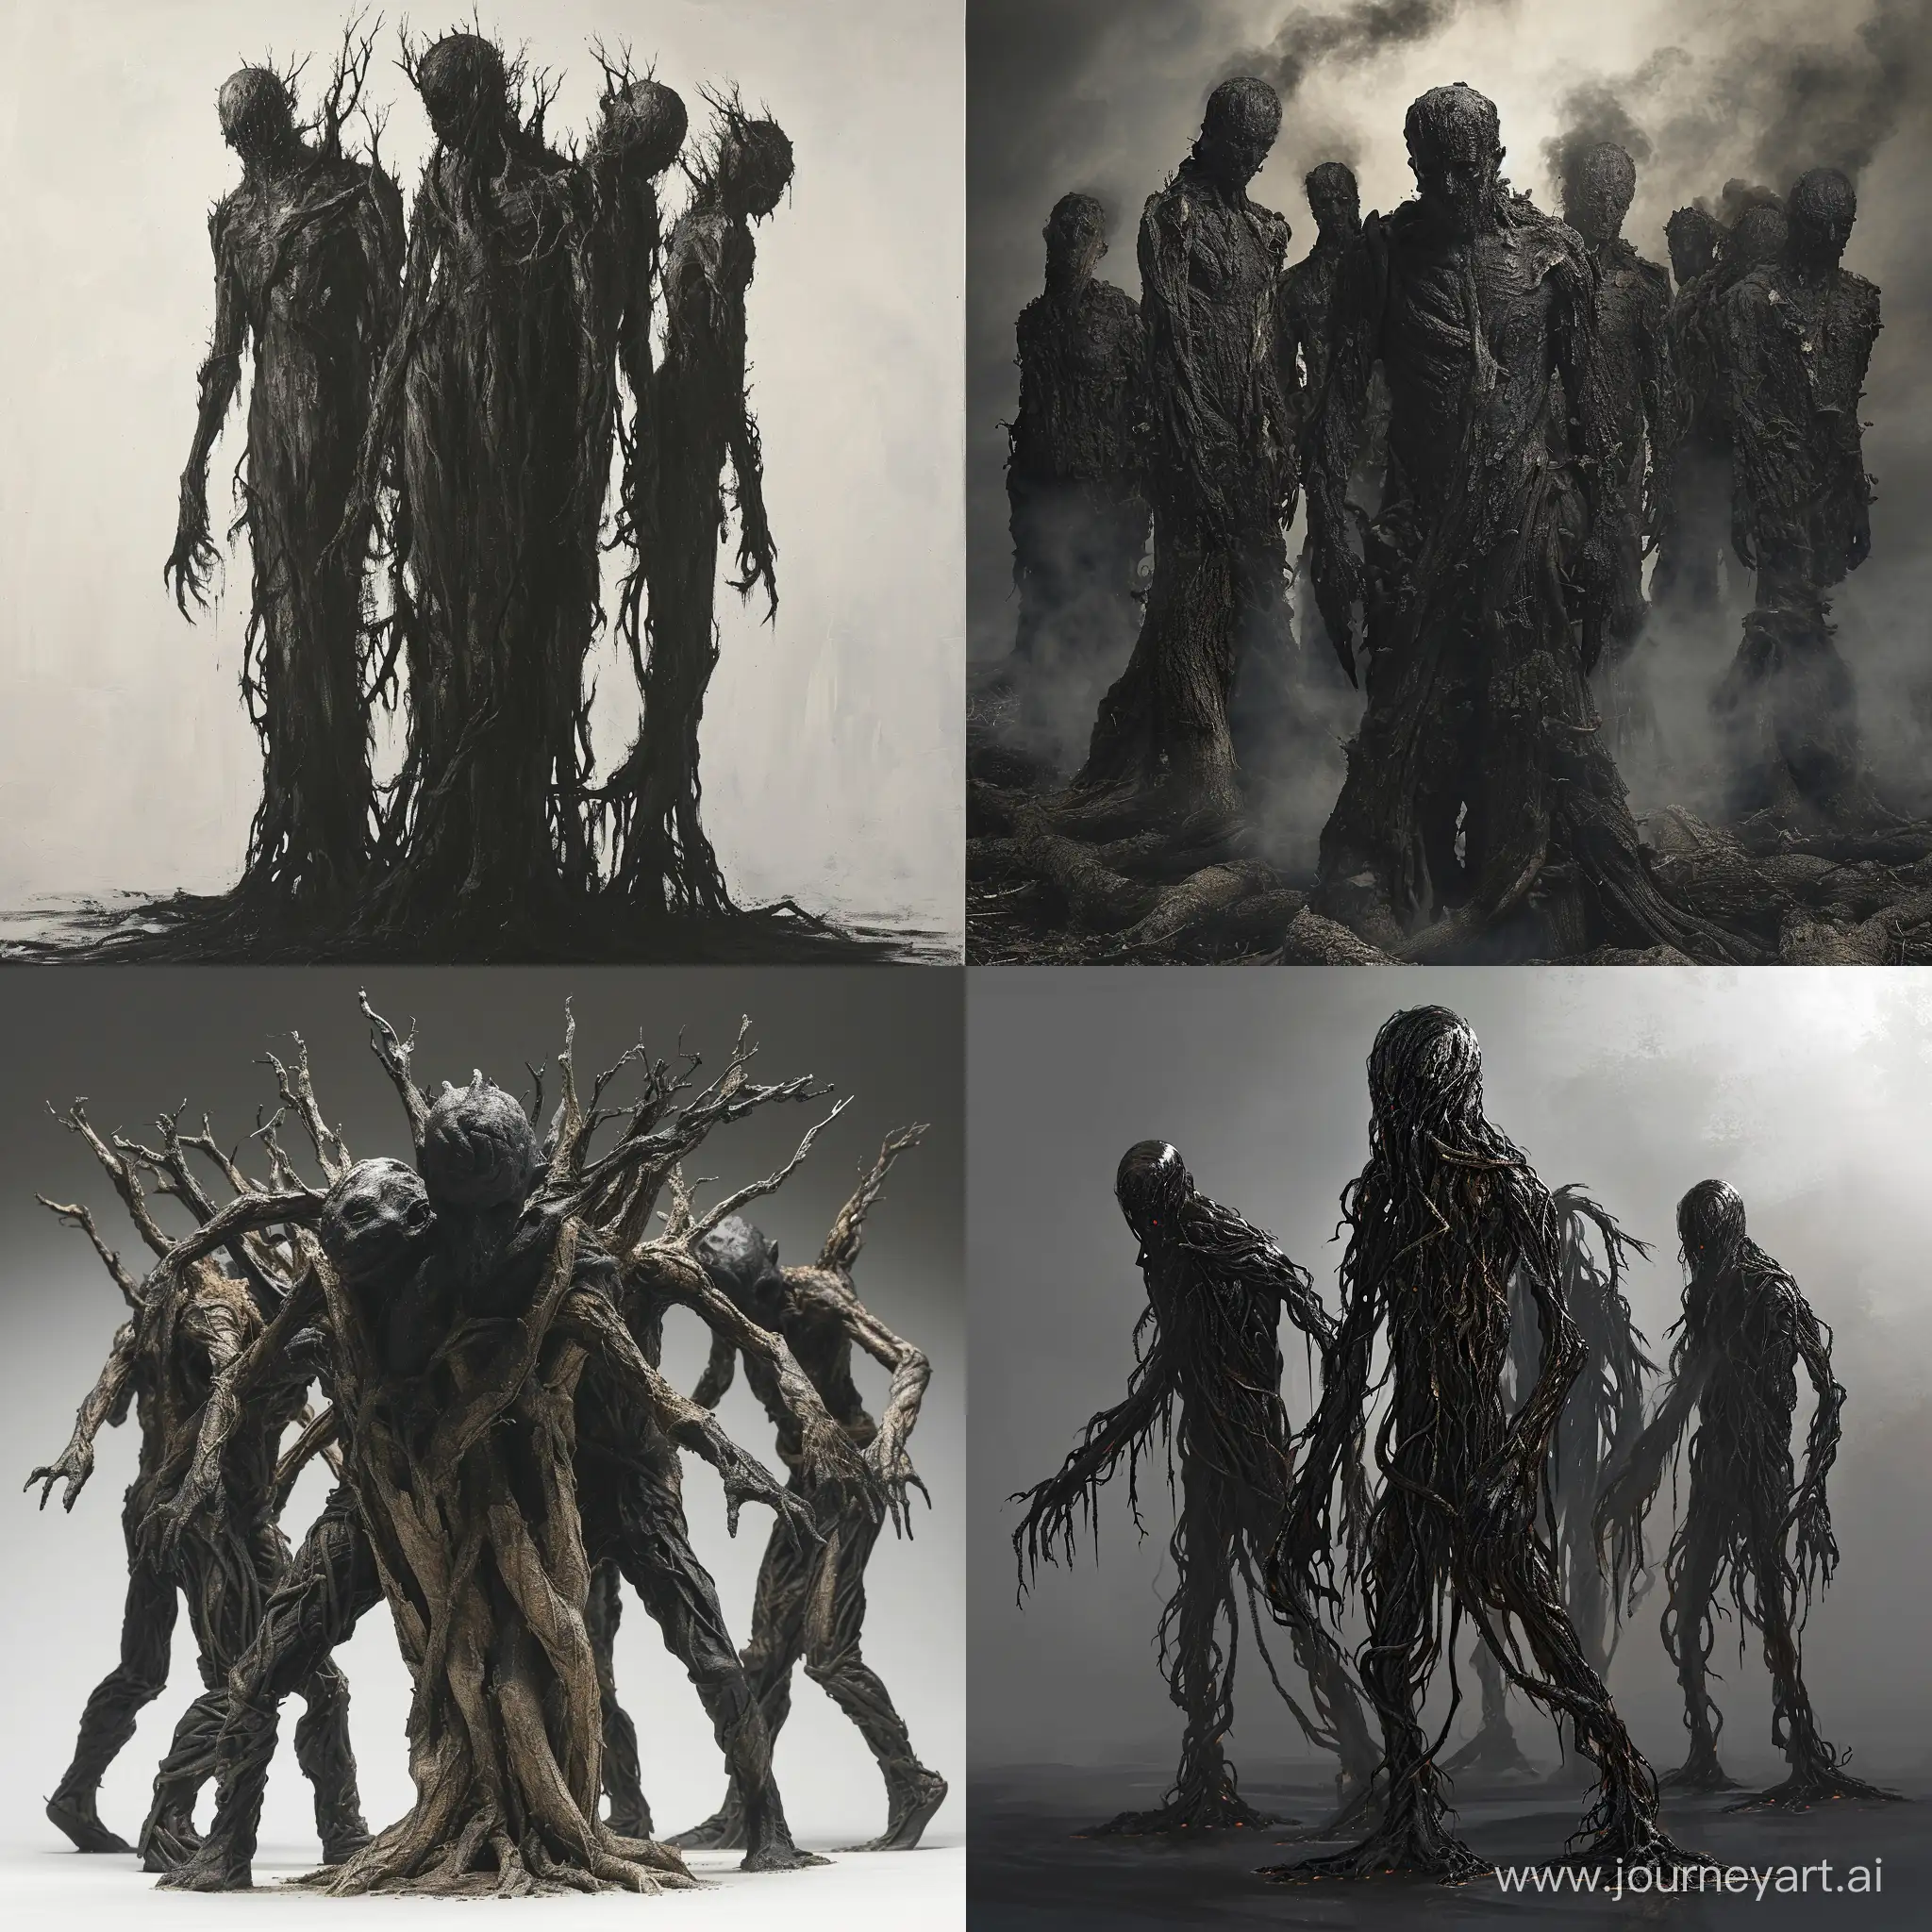 Eerie-Black-Ents-Ominous-Beings-Crafted-from-Fused-Human-Bodies-and-Tree-Trunks